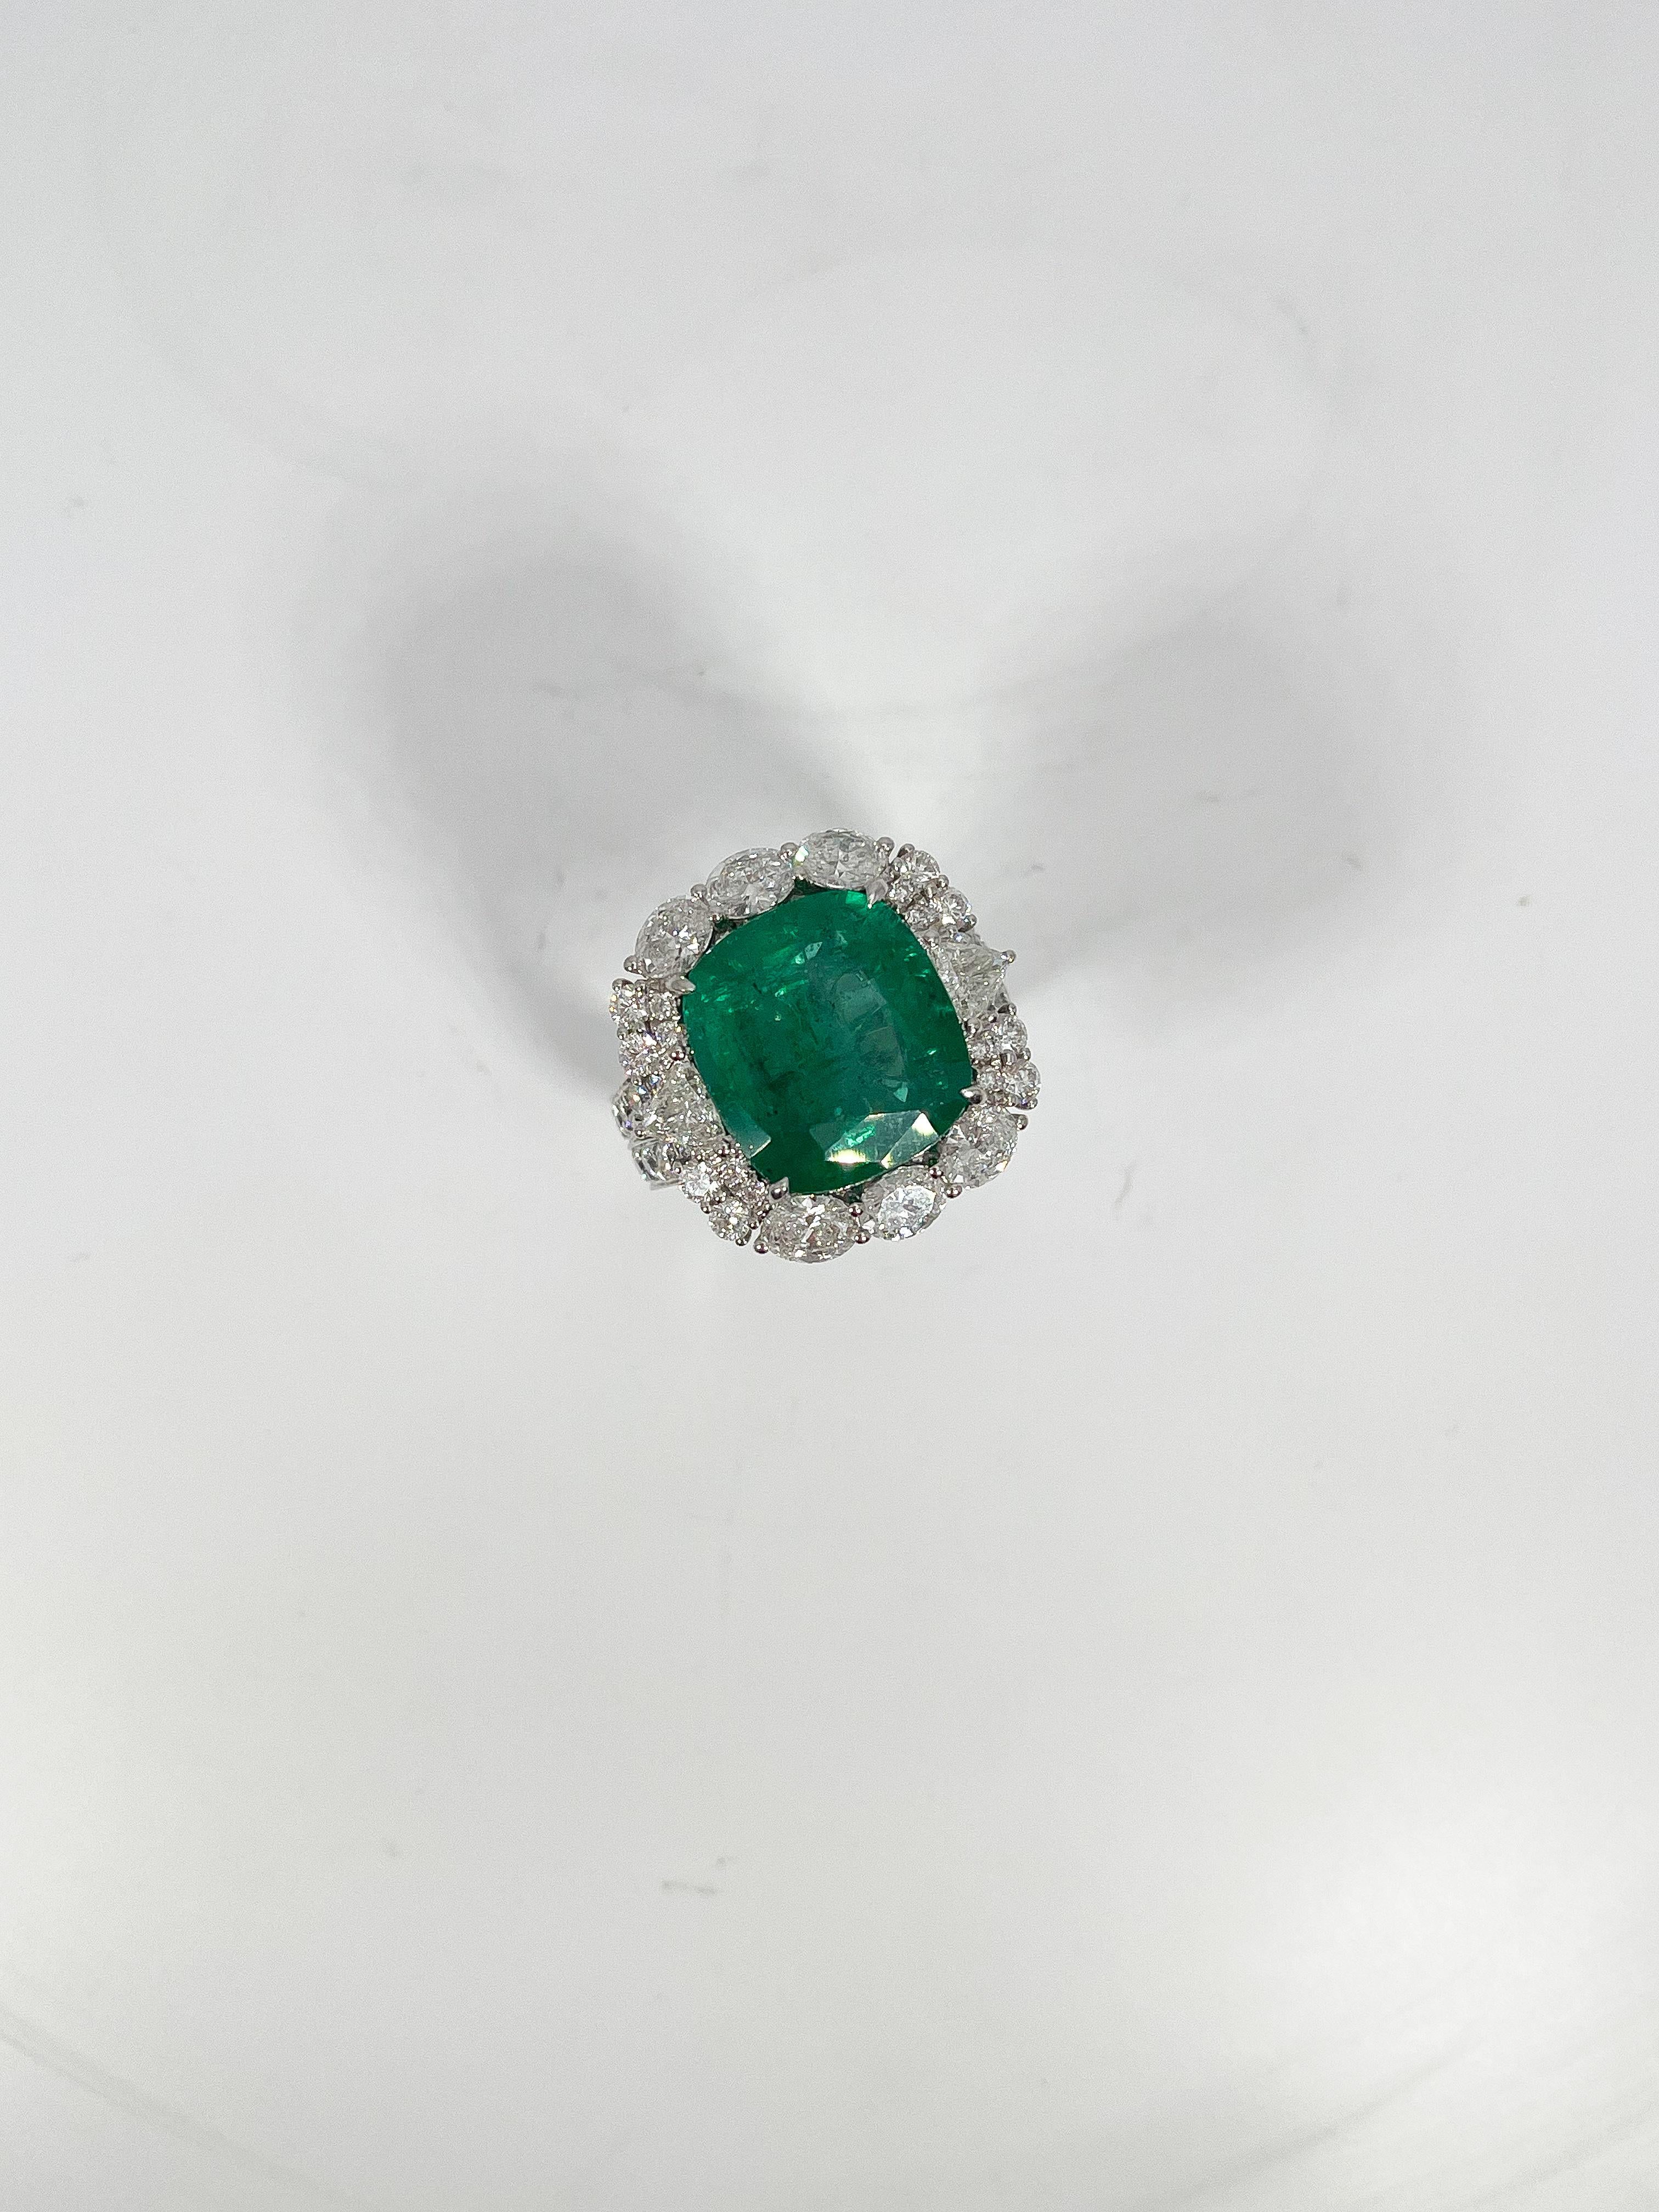 Ladies 18k white gold size 7 ring, prong set with a cushion brilliant cut emerald and multi-shaped diamonds. Total item weight is 16.4 Grams. Comes with AJI Certification.
Emerald Attributes: 
Shape and cut- Cushion brilliant cut
Measurements-